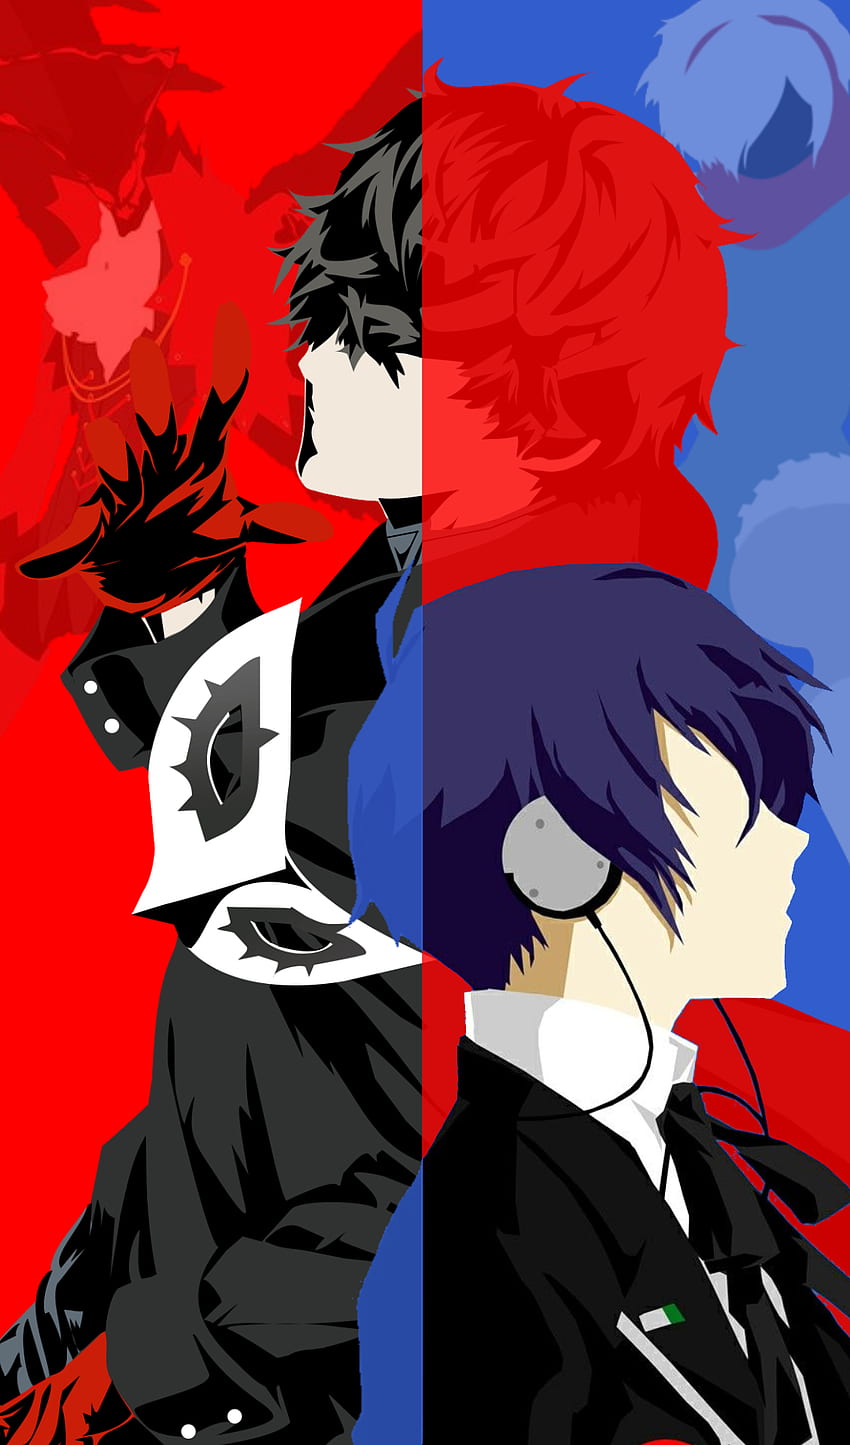 Persona 3 & 5 mashup I made, it's my first time making something like this so feedback is appreciated!: Persona5, Persona 3 Phone HD phone wallpaper